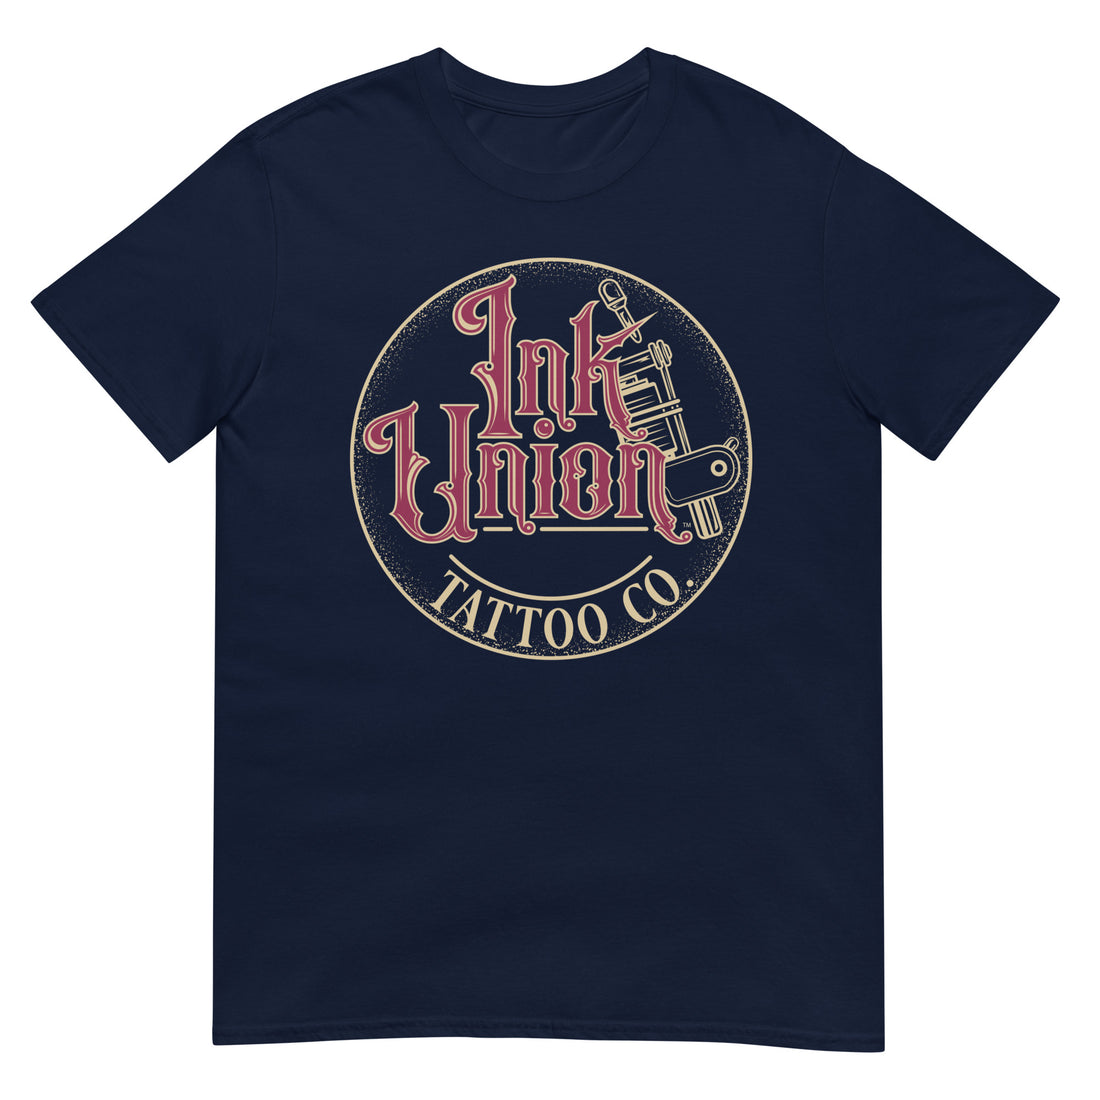 A navy blue t-shirt with a gold circle containing fancy lettering in red and gold that says Ink Union and a gold tattoo machine peeking out from behind on the right side.  There is a dot work gradient inside the circle, and the words Tattoo Co. in gold are at the bottom of the design.